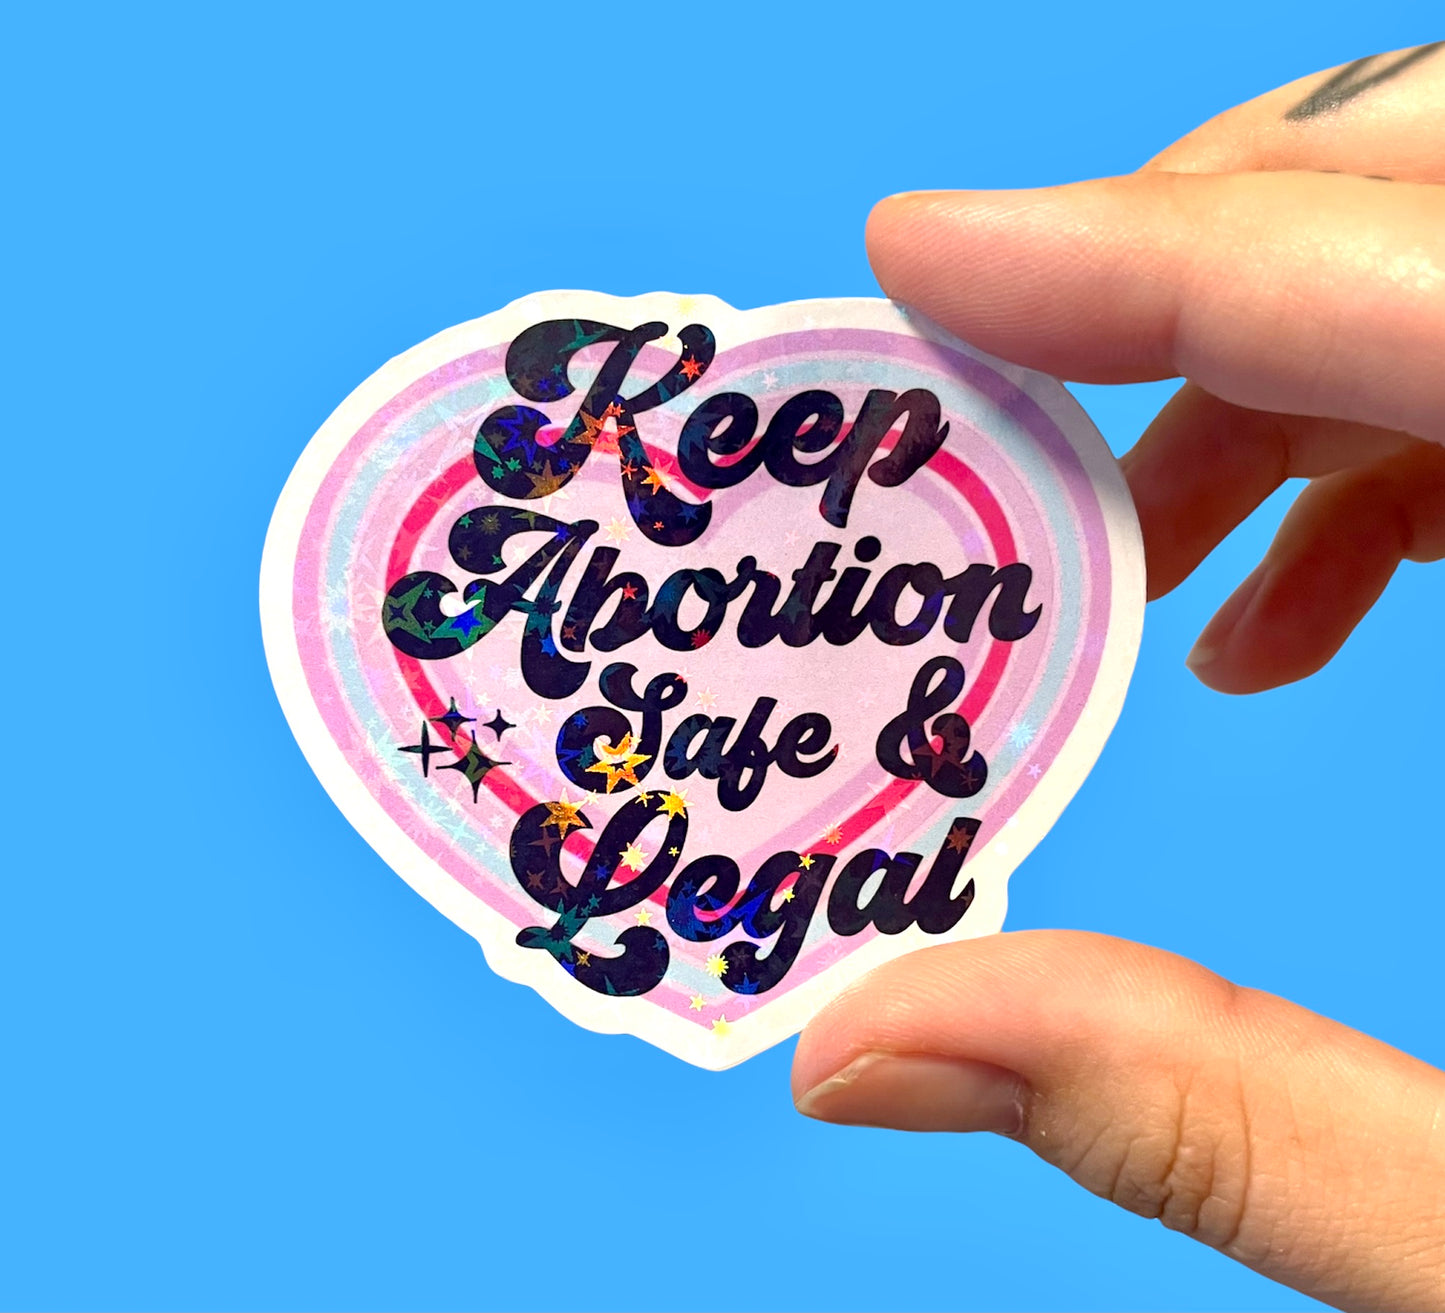 Keep abortion safe and legal